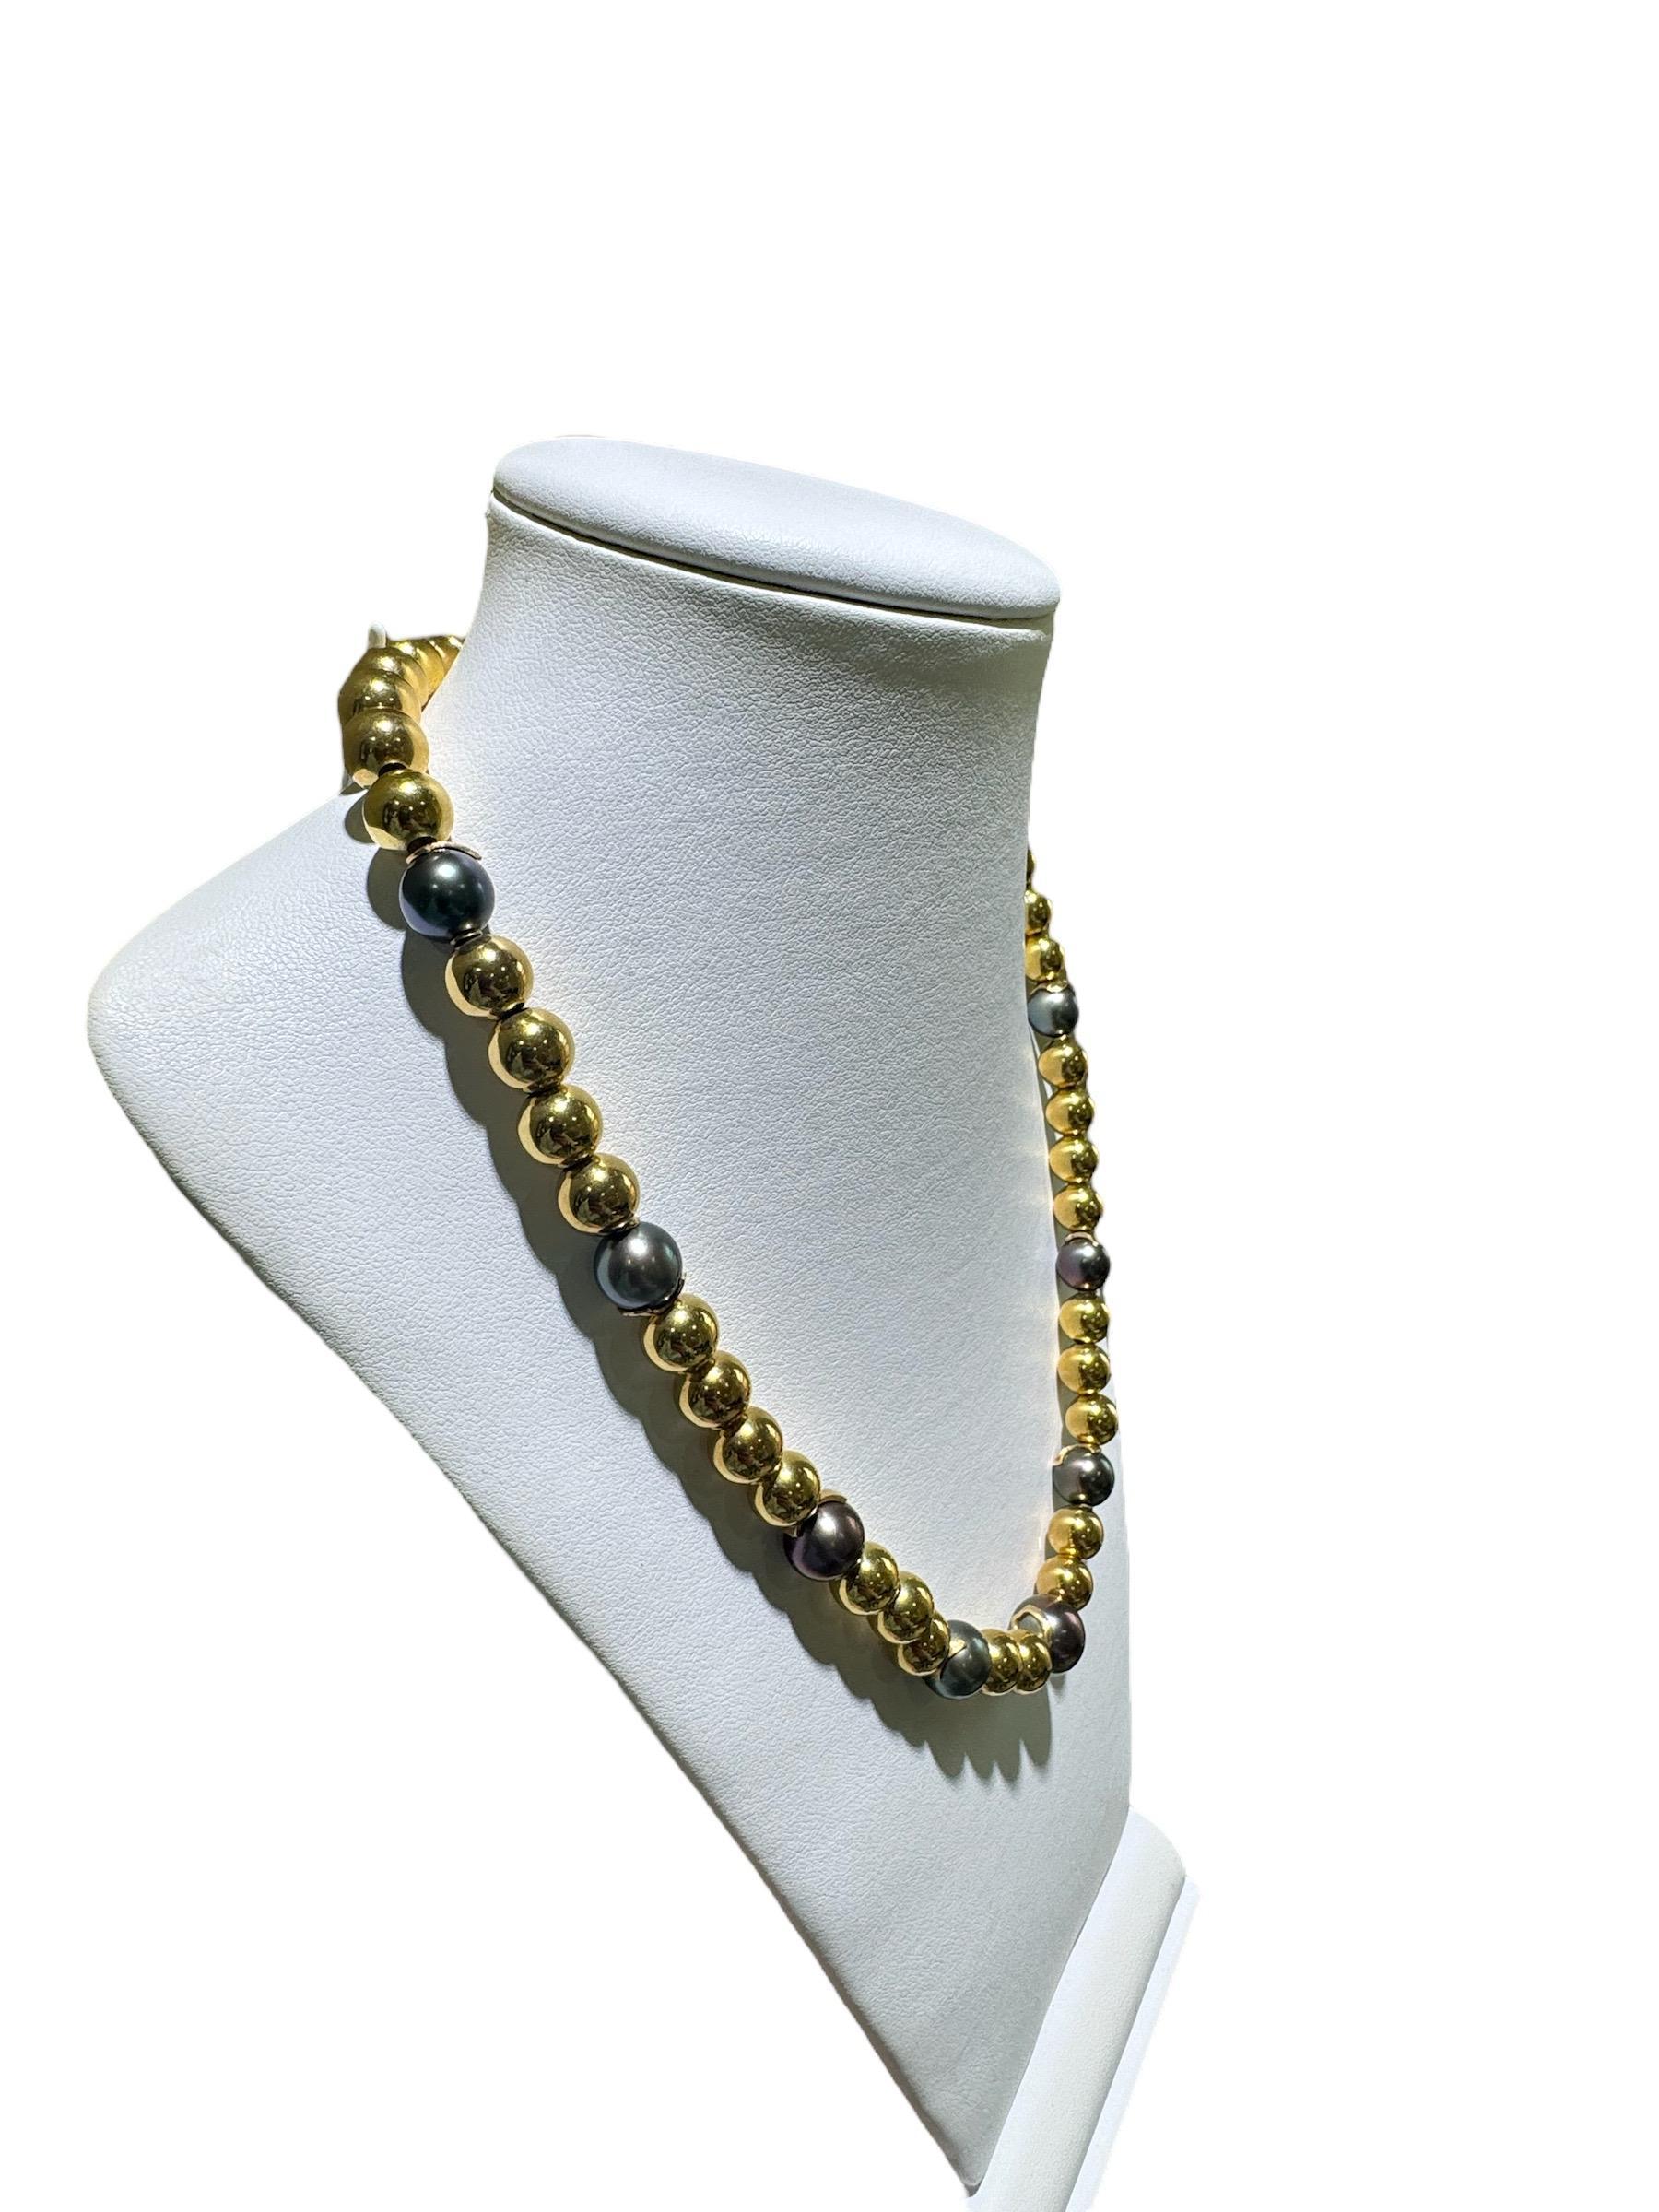 We have never seen this unique combination of pearls & gold beads.
This stunning necklace is composed of 7 Black / Grey Tahitian Pearl ranging in size from 11.5mm - 9.5mm.
The pearls are accented with 43 - 9mm 14K Yellow Gold Round Ball